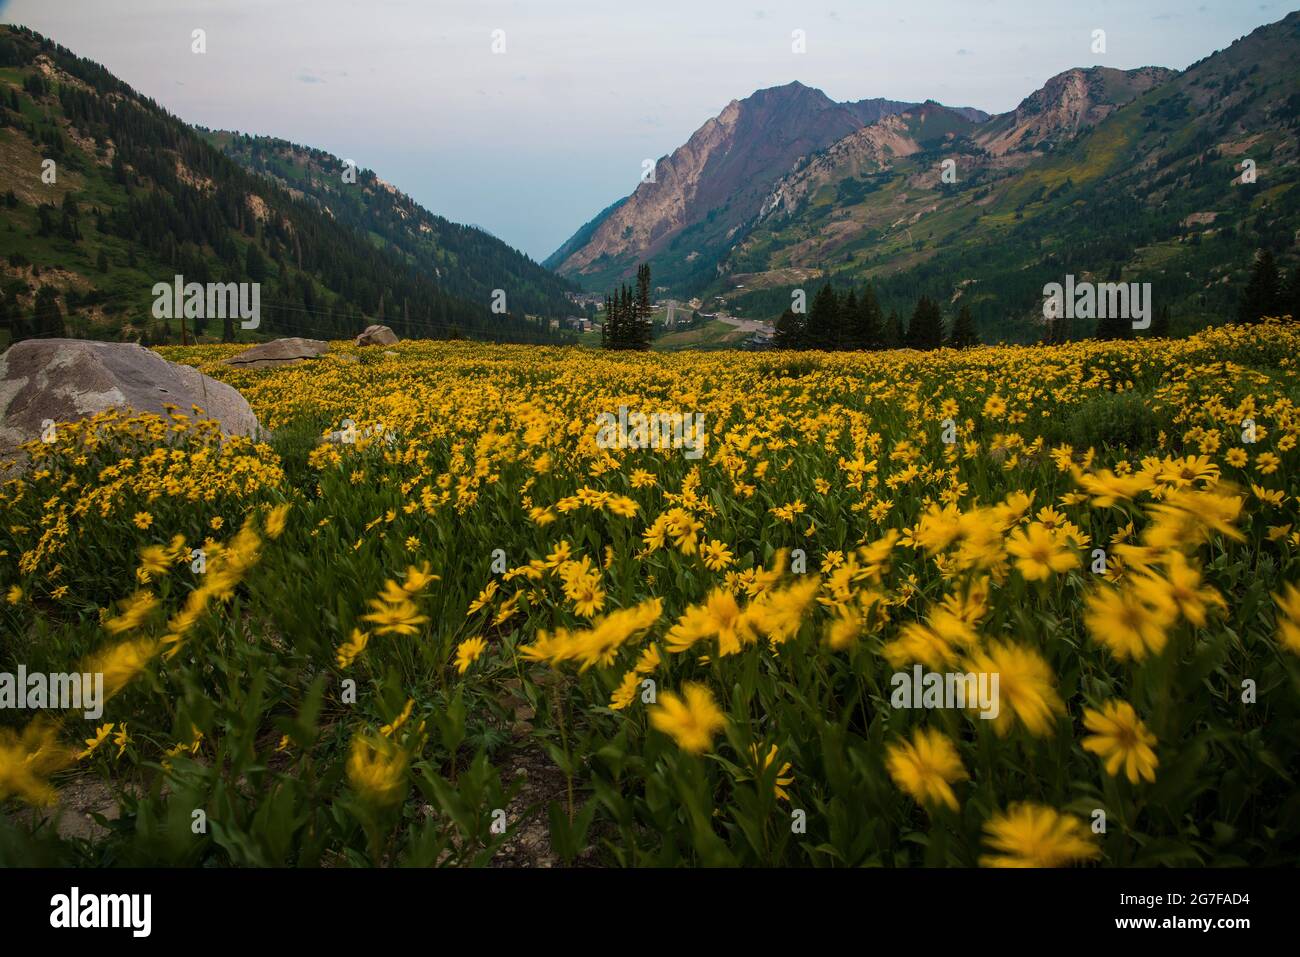 Yellow wildflowers blowing in the wind on a mountain hillside.  Beautiful wildflowers in the Albion Basin, Utah, are world renowned. Stock Photo